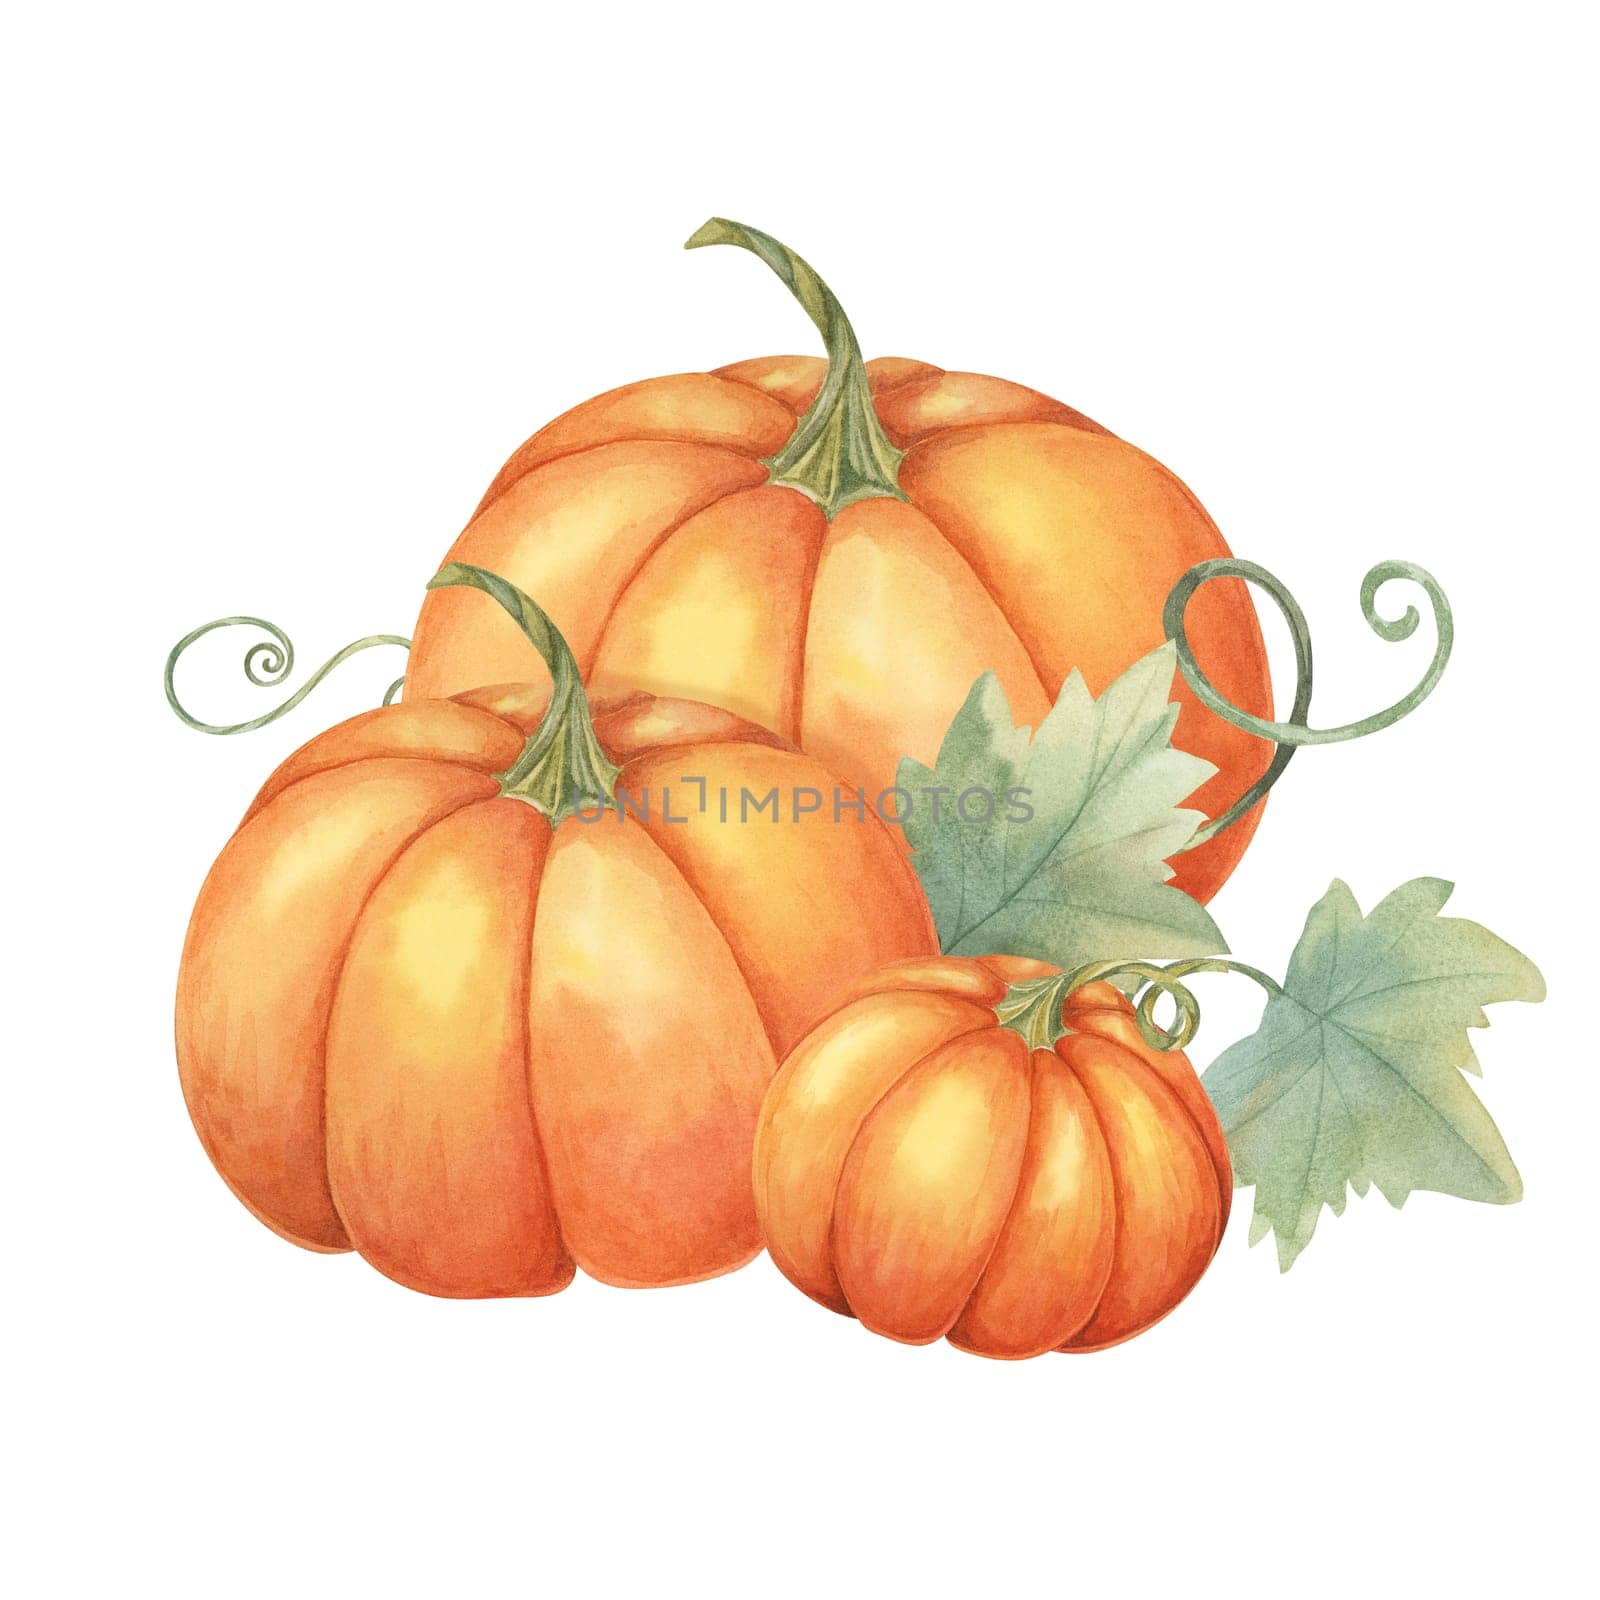 Three orange pumpkins with green leaves and vines. Bright squash illustration. Watercolor clipart suitable for autumn decor, stickers, Thanksgiving cards, and harvest festival promotional materials